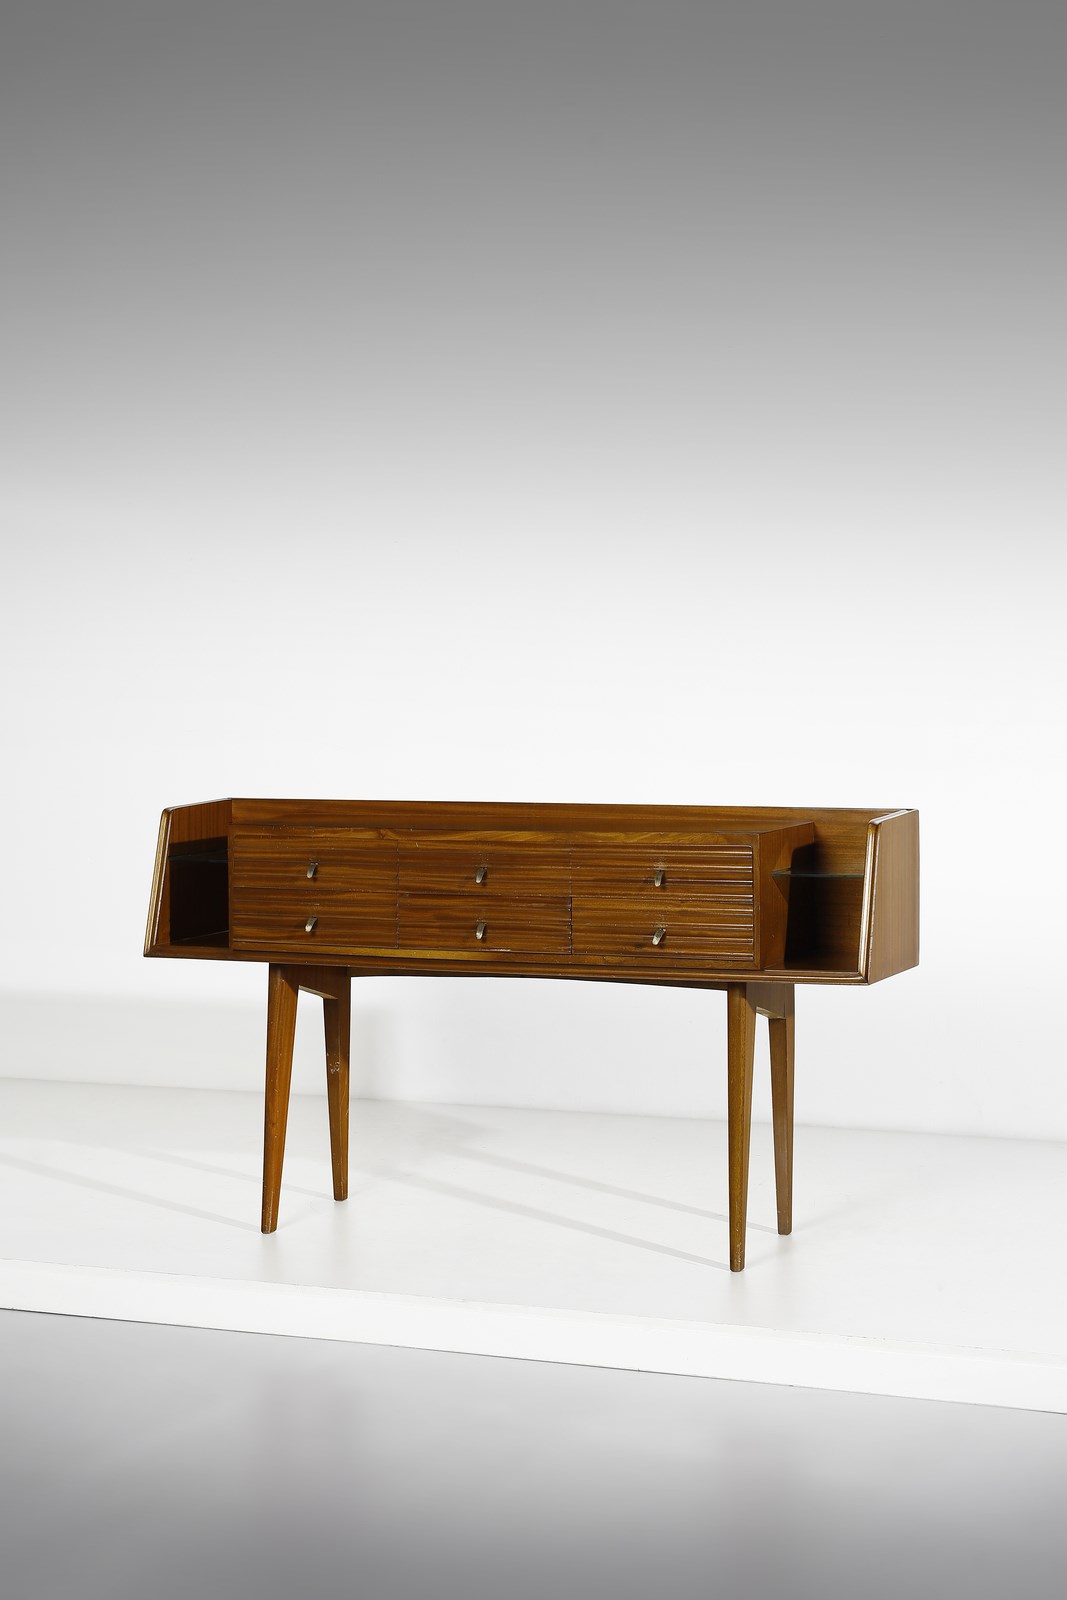 attributed. Living room furniture (Gio Ponti)